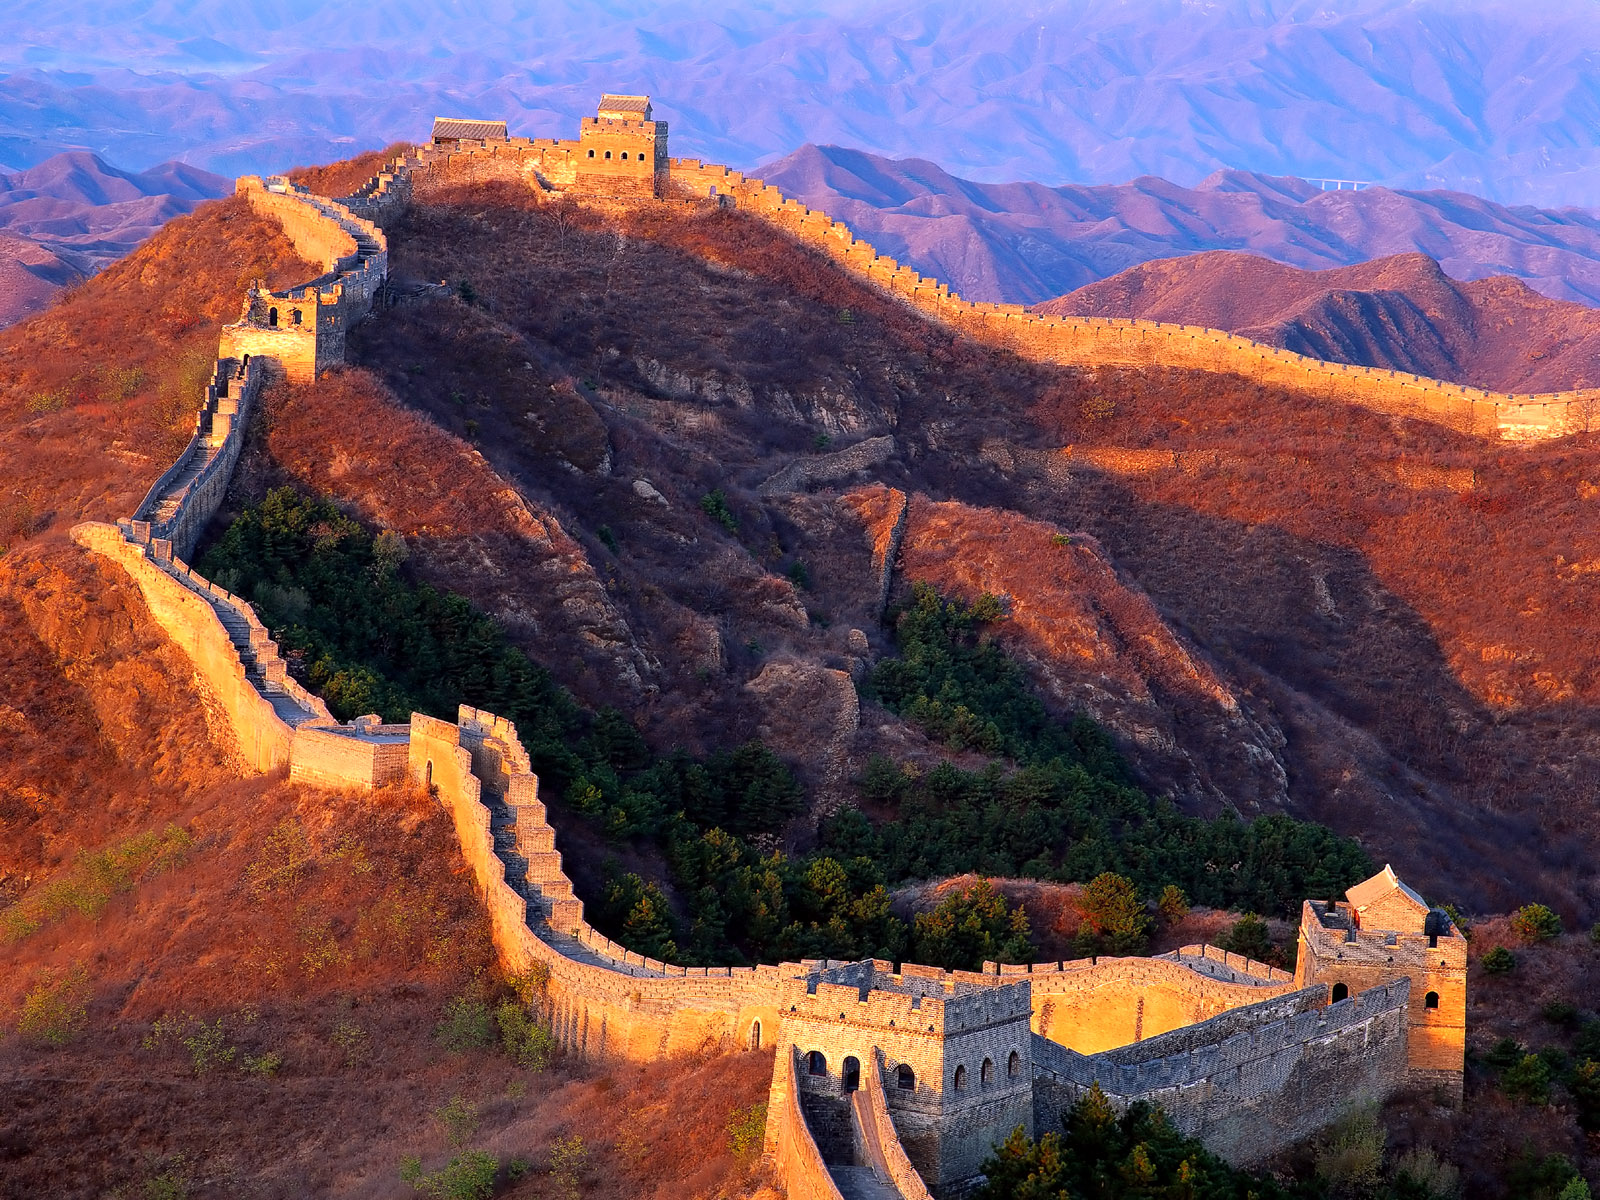 Download 20 Great Wall of China HD Wallpapers 1600×1200